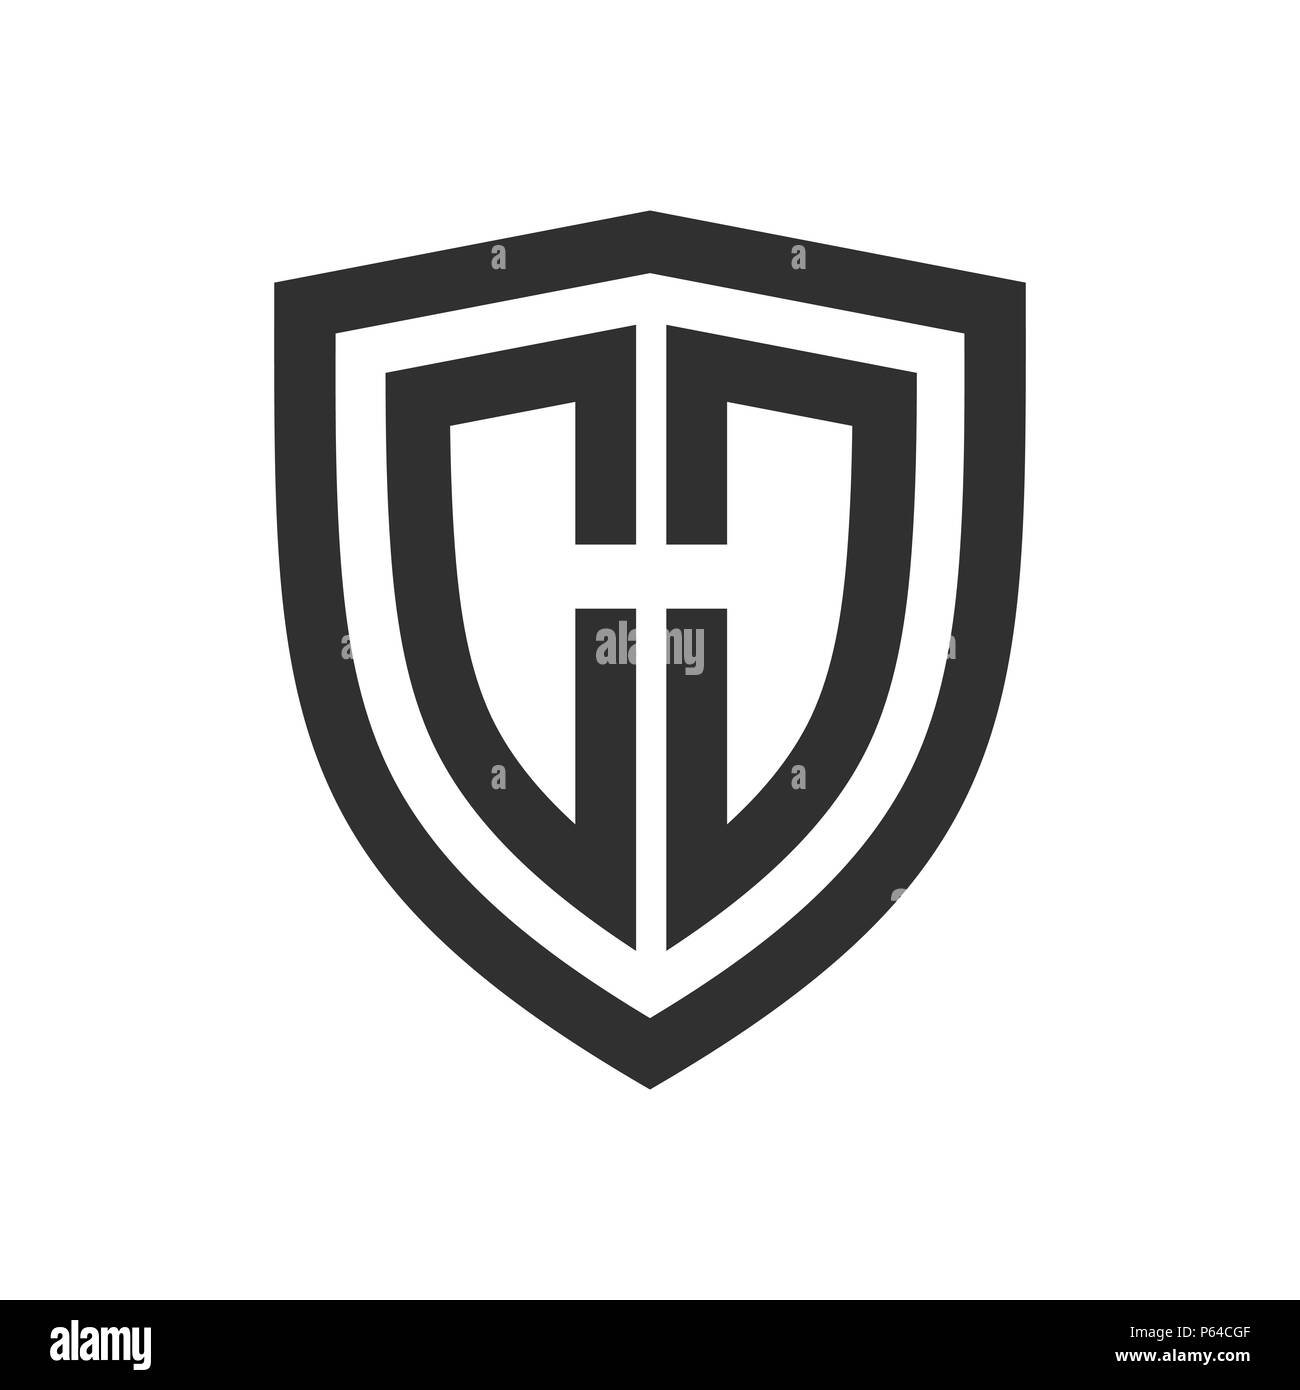 Shield Basic Outline Initial H Vector Symbol Graphic Logo Design Template Stock Vector